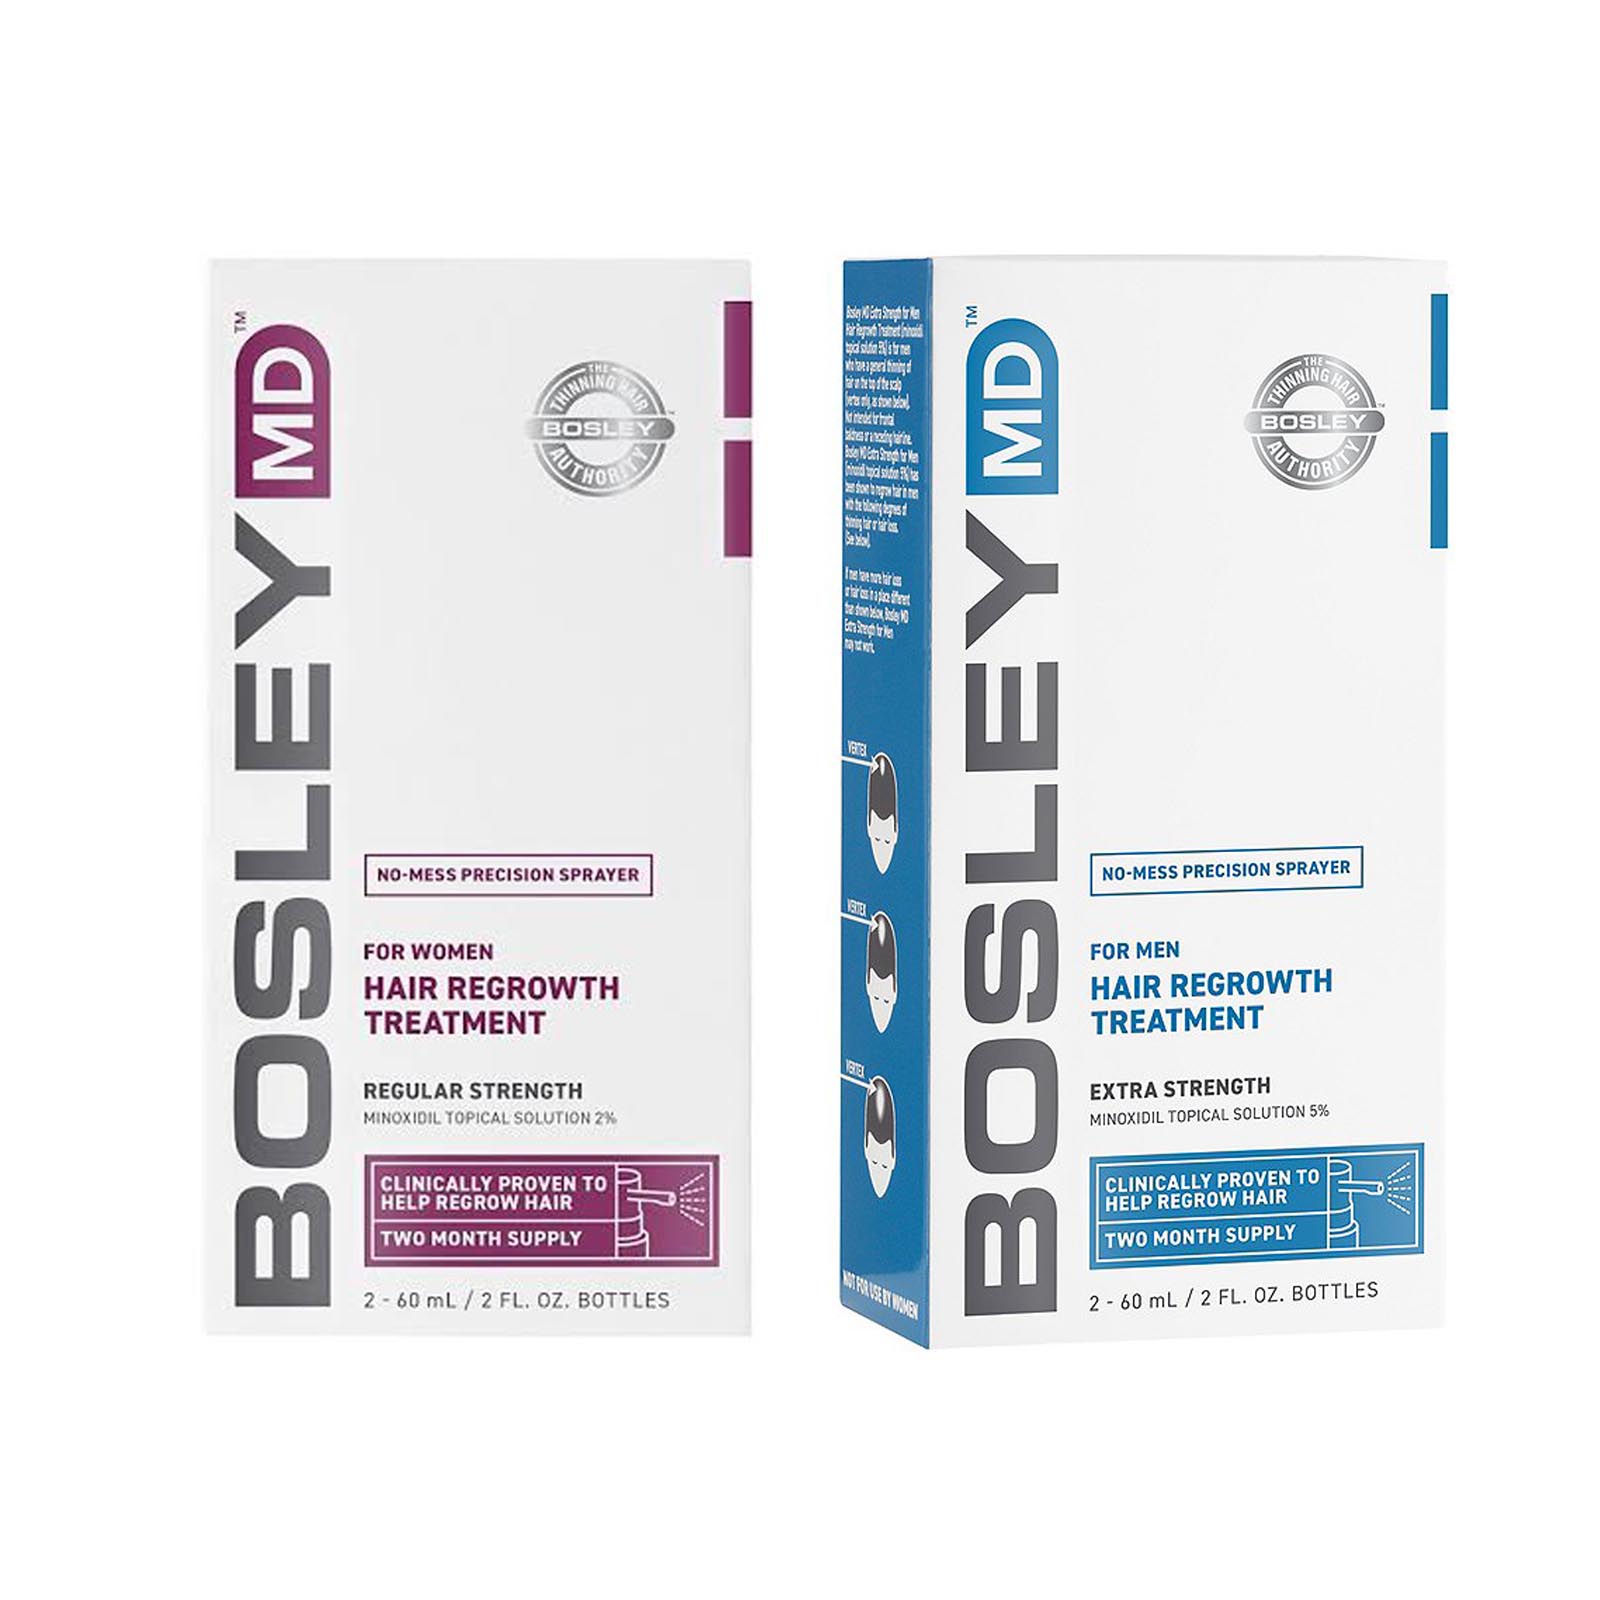 Bosley Hair Regrowth Treatment - For Men and Women - Bella Pelle